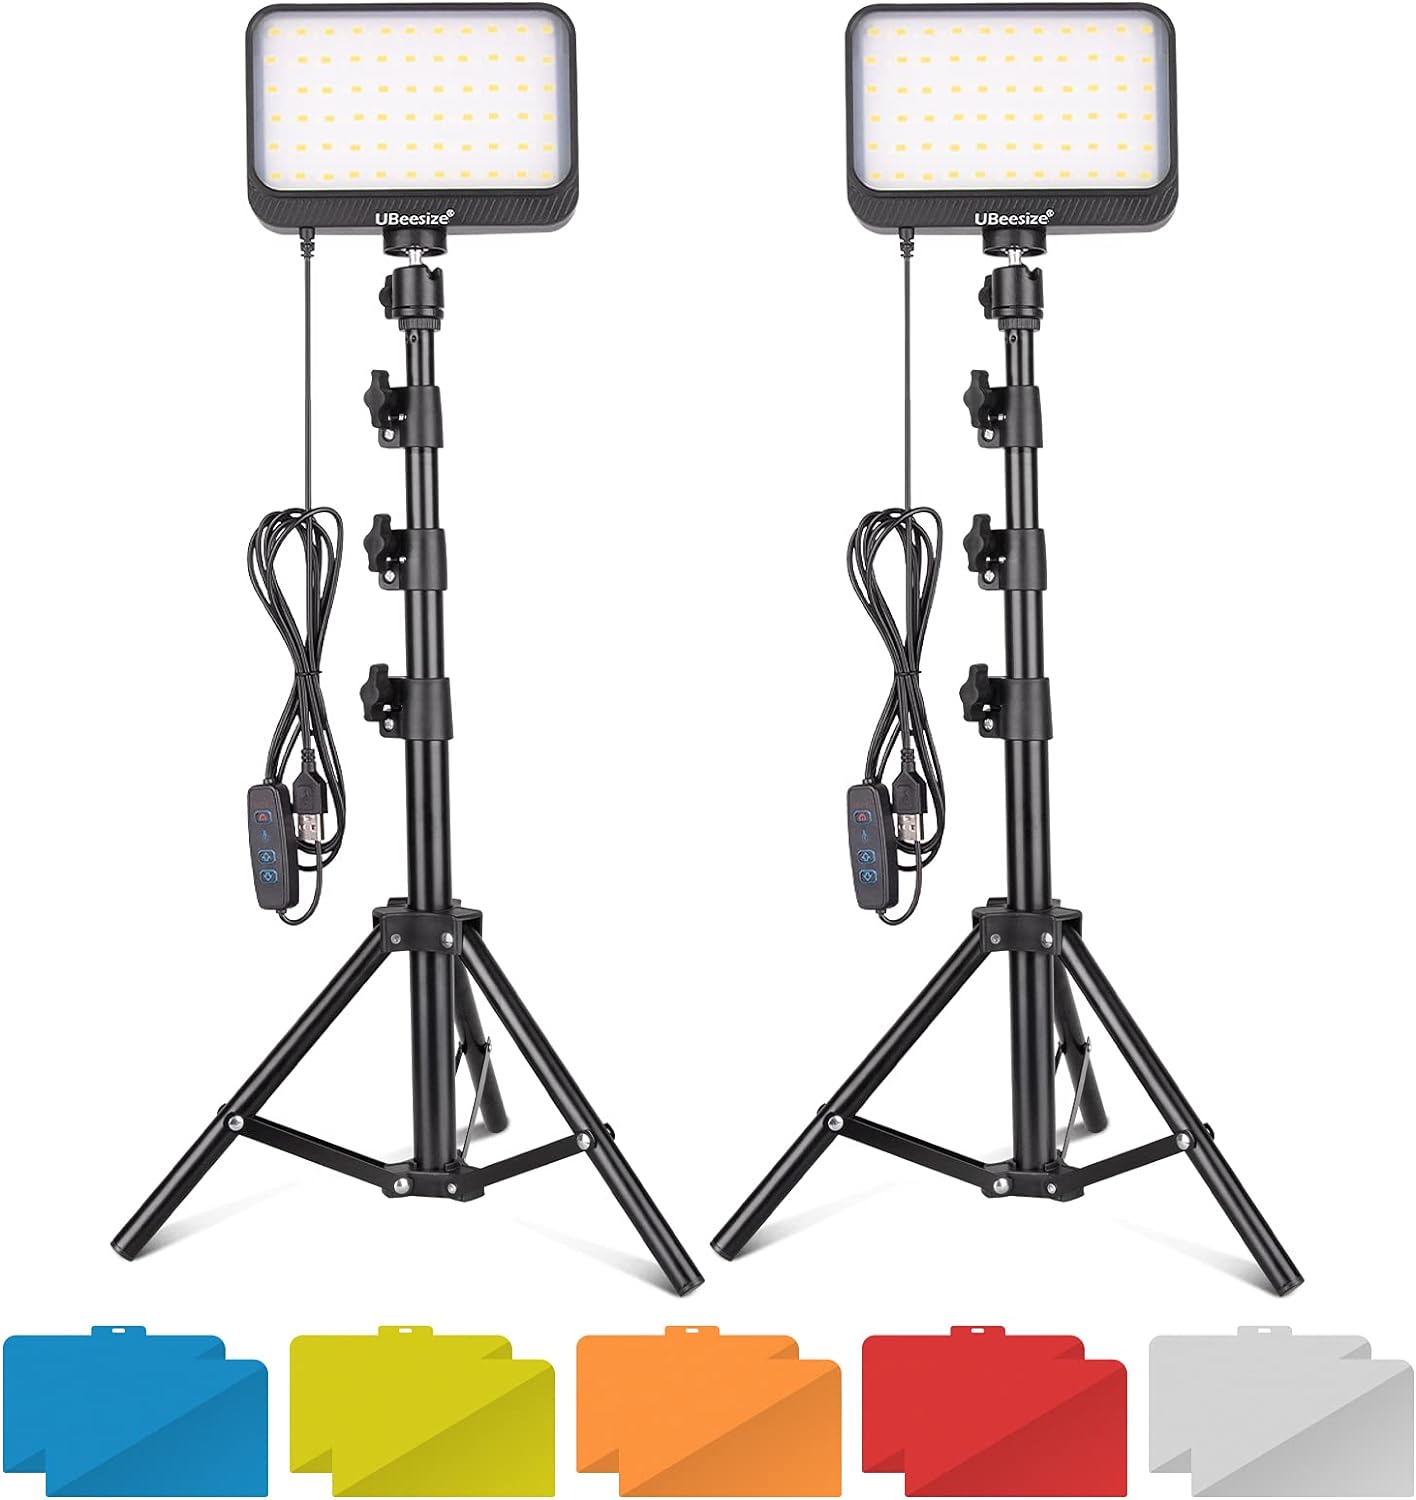 UBeesize LED Video Light Kit, 2Pcs Dimmable Continuous Portable Photography Lighting with Adjustable Tripod Stand  5 Color Filters for Tabletop/Low-Angle Shooting, for Zoom, Game Streaming, YouTube